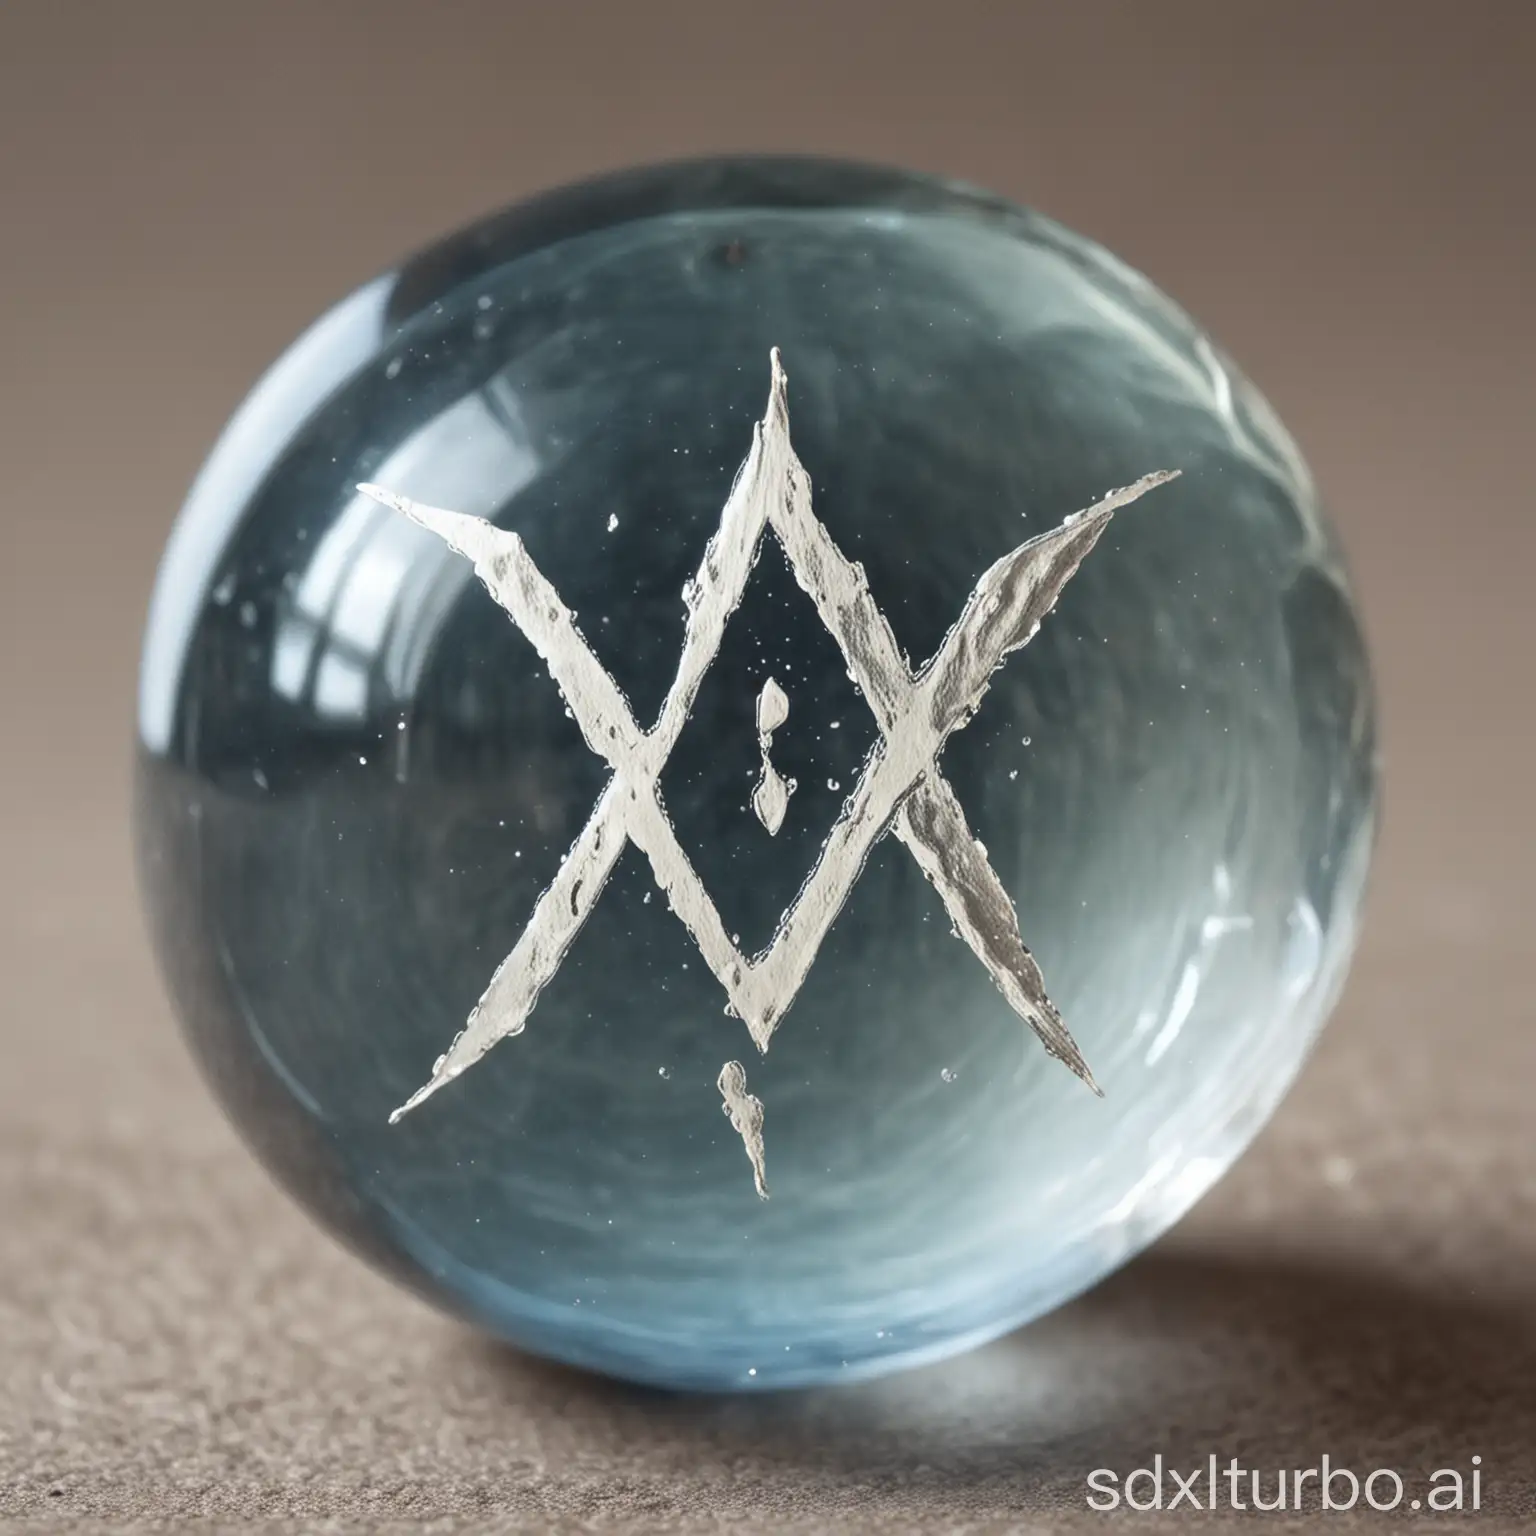 Glowing-Water-Rune-Orb-Mystical-Energy-Symbolizing-the-Power-of-Water